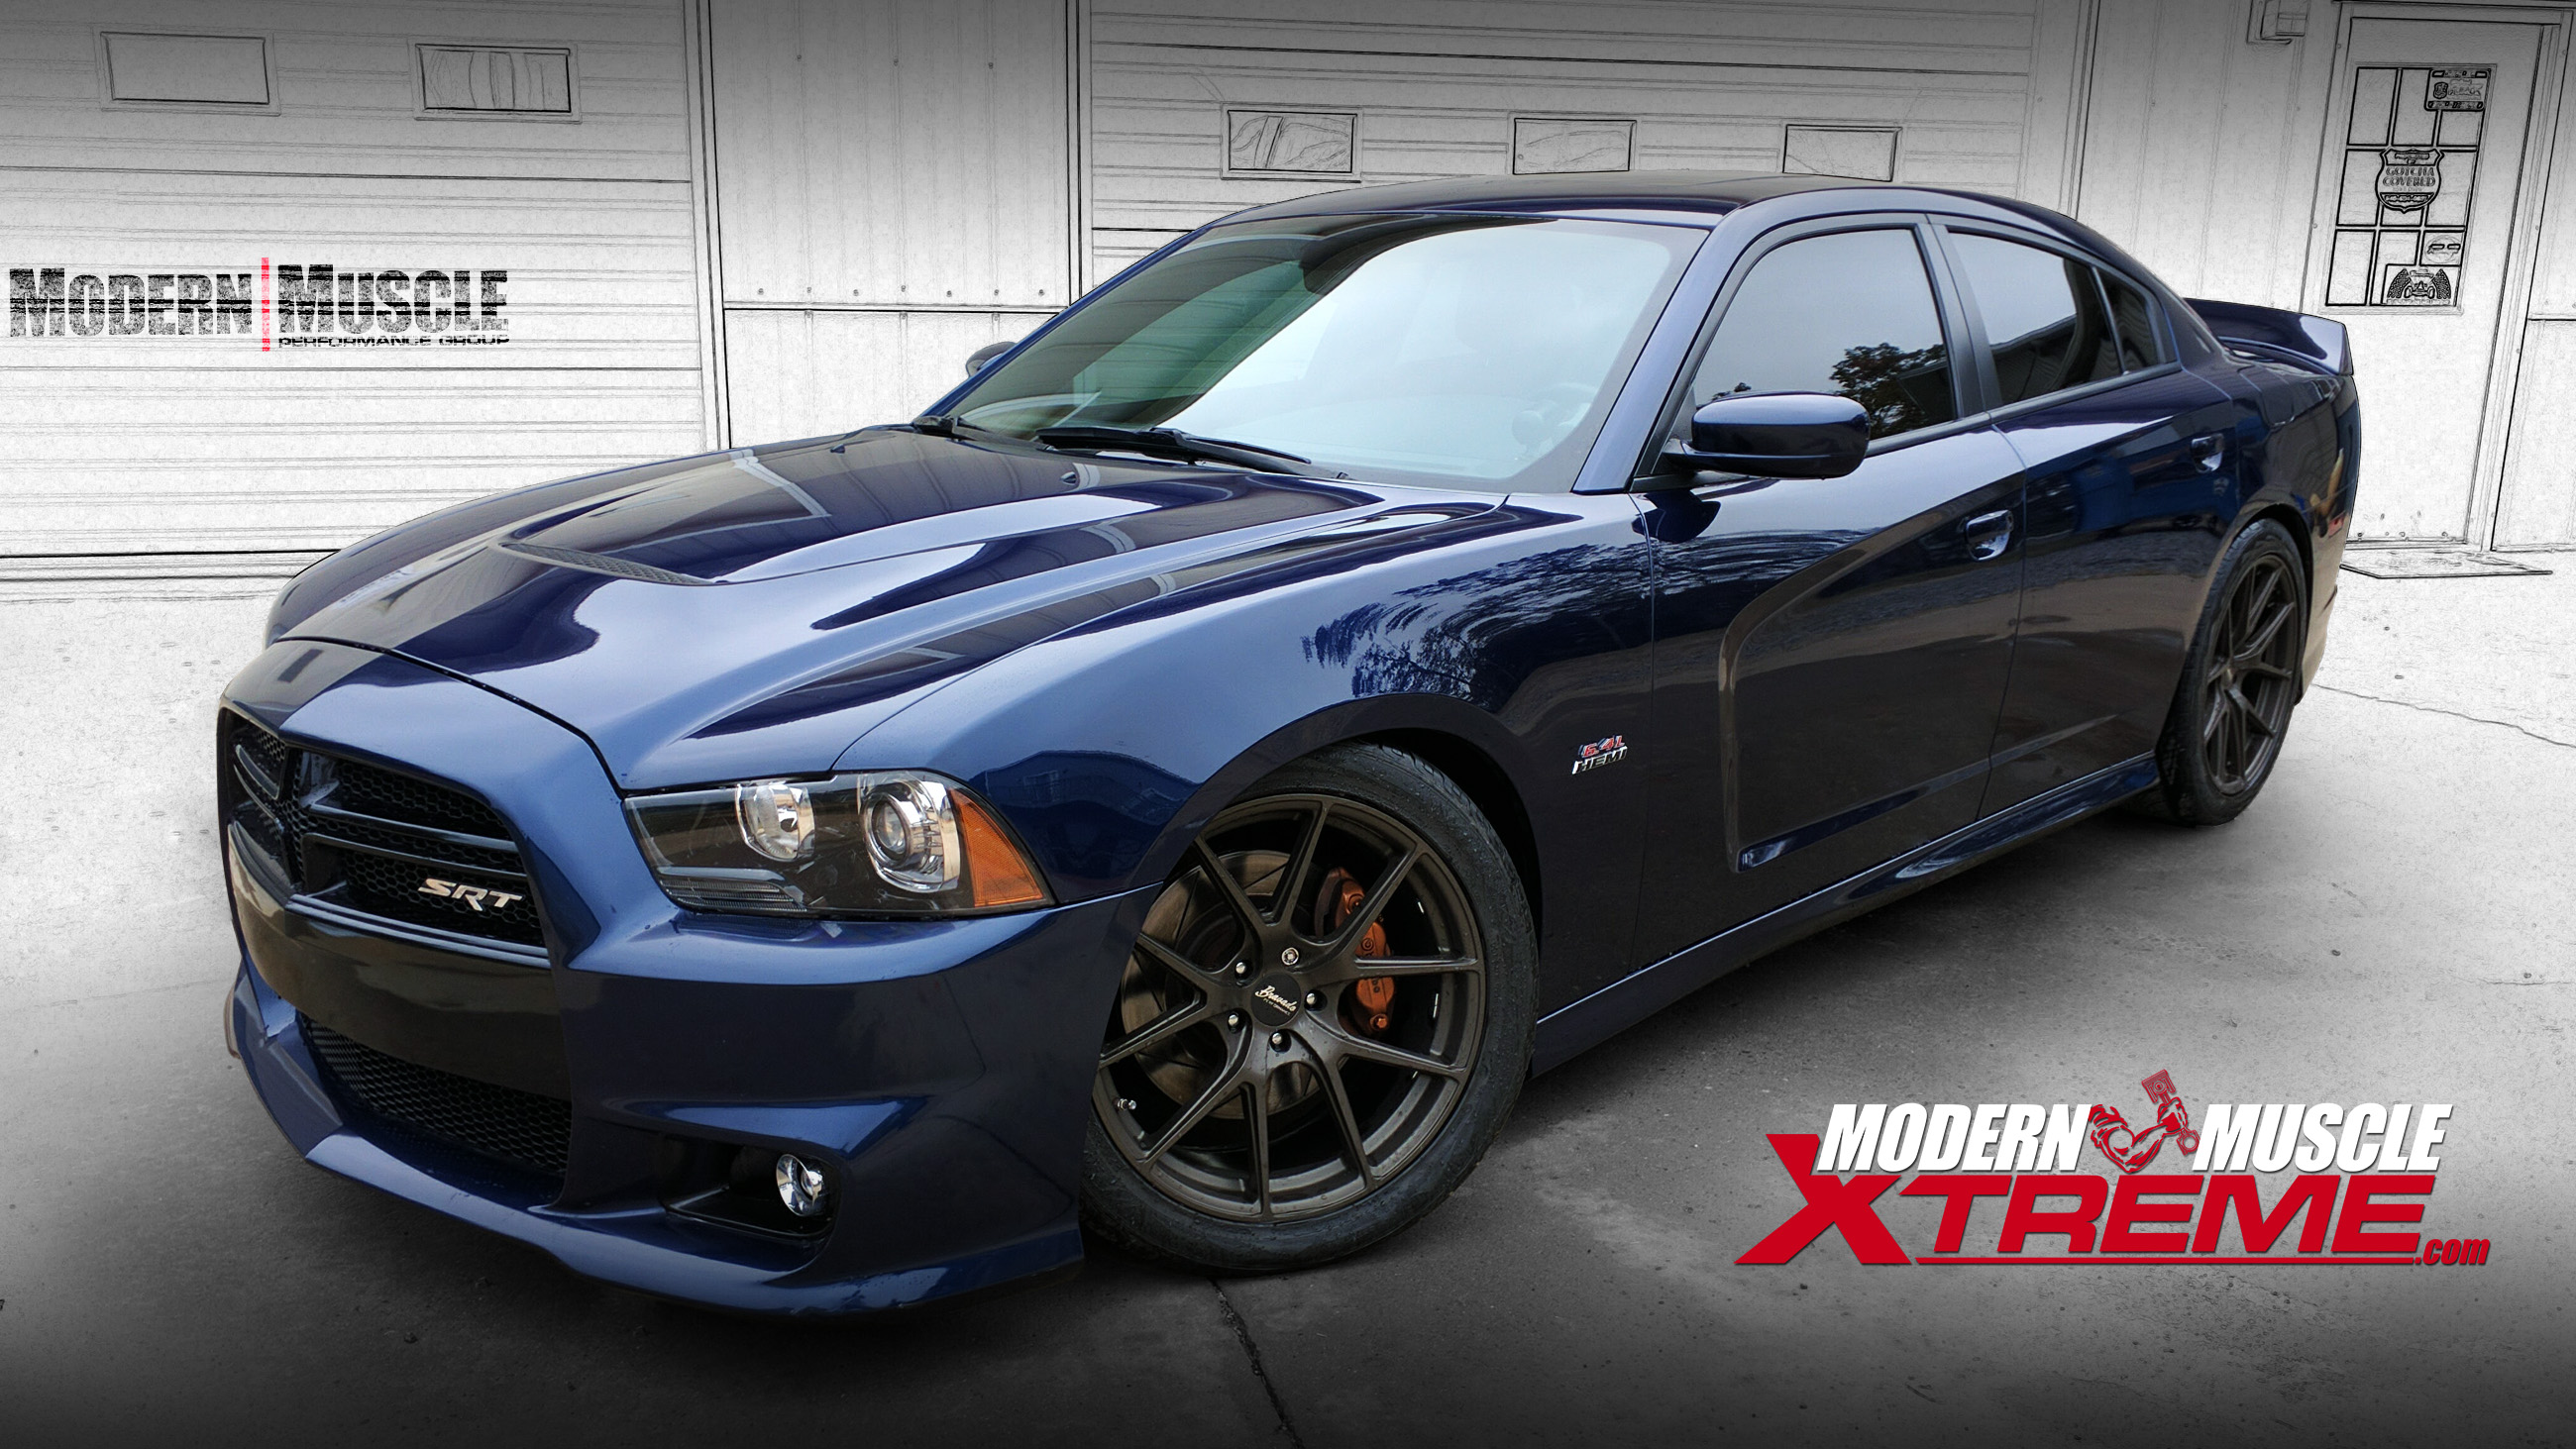 Forged 392 HEMI Stroker Engine Procharger Supercharged 2013 Charger Build by Modern Muscle Performance